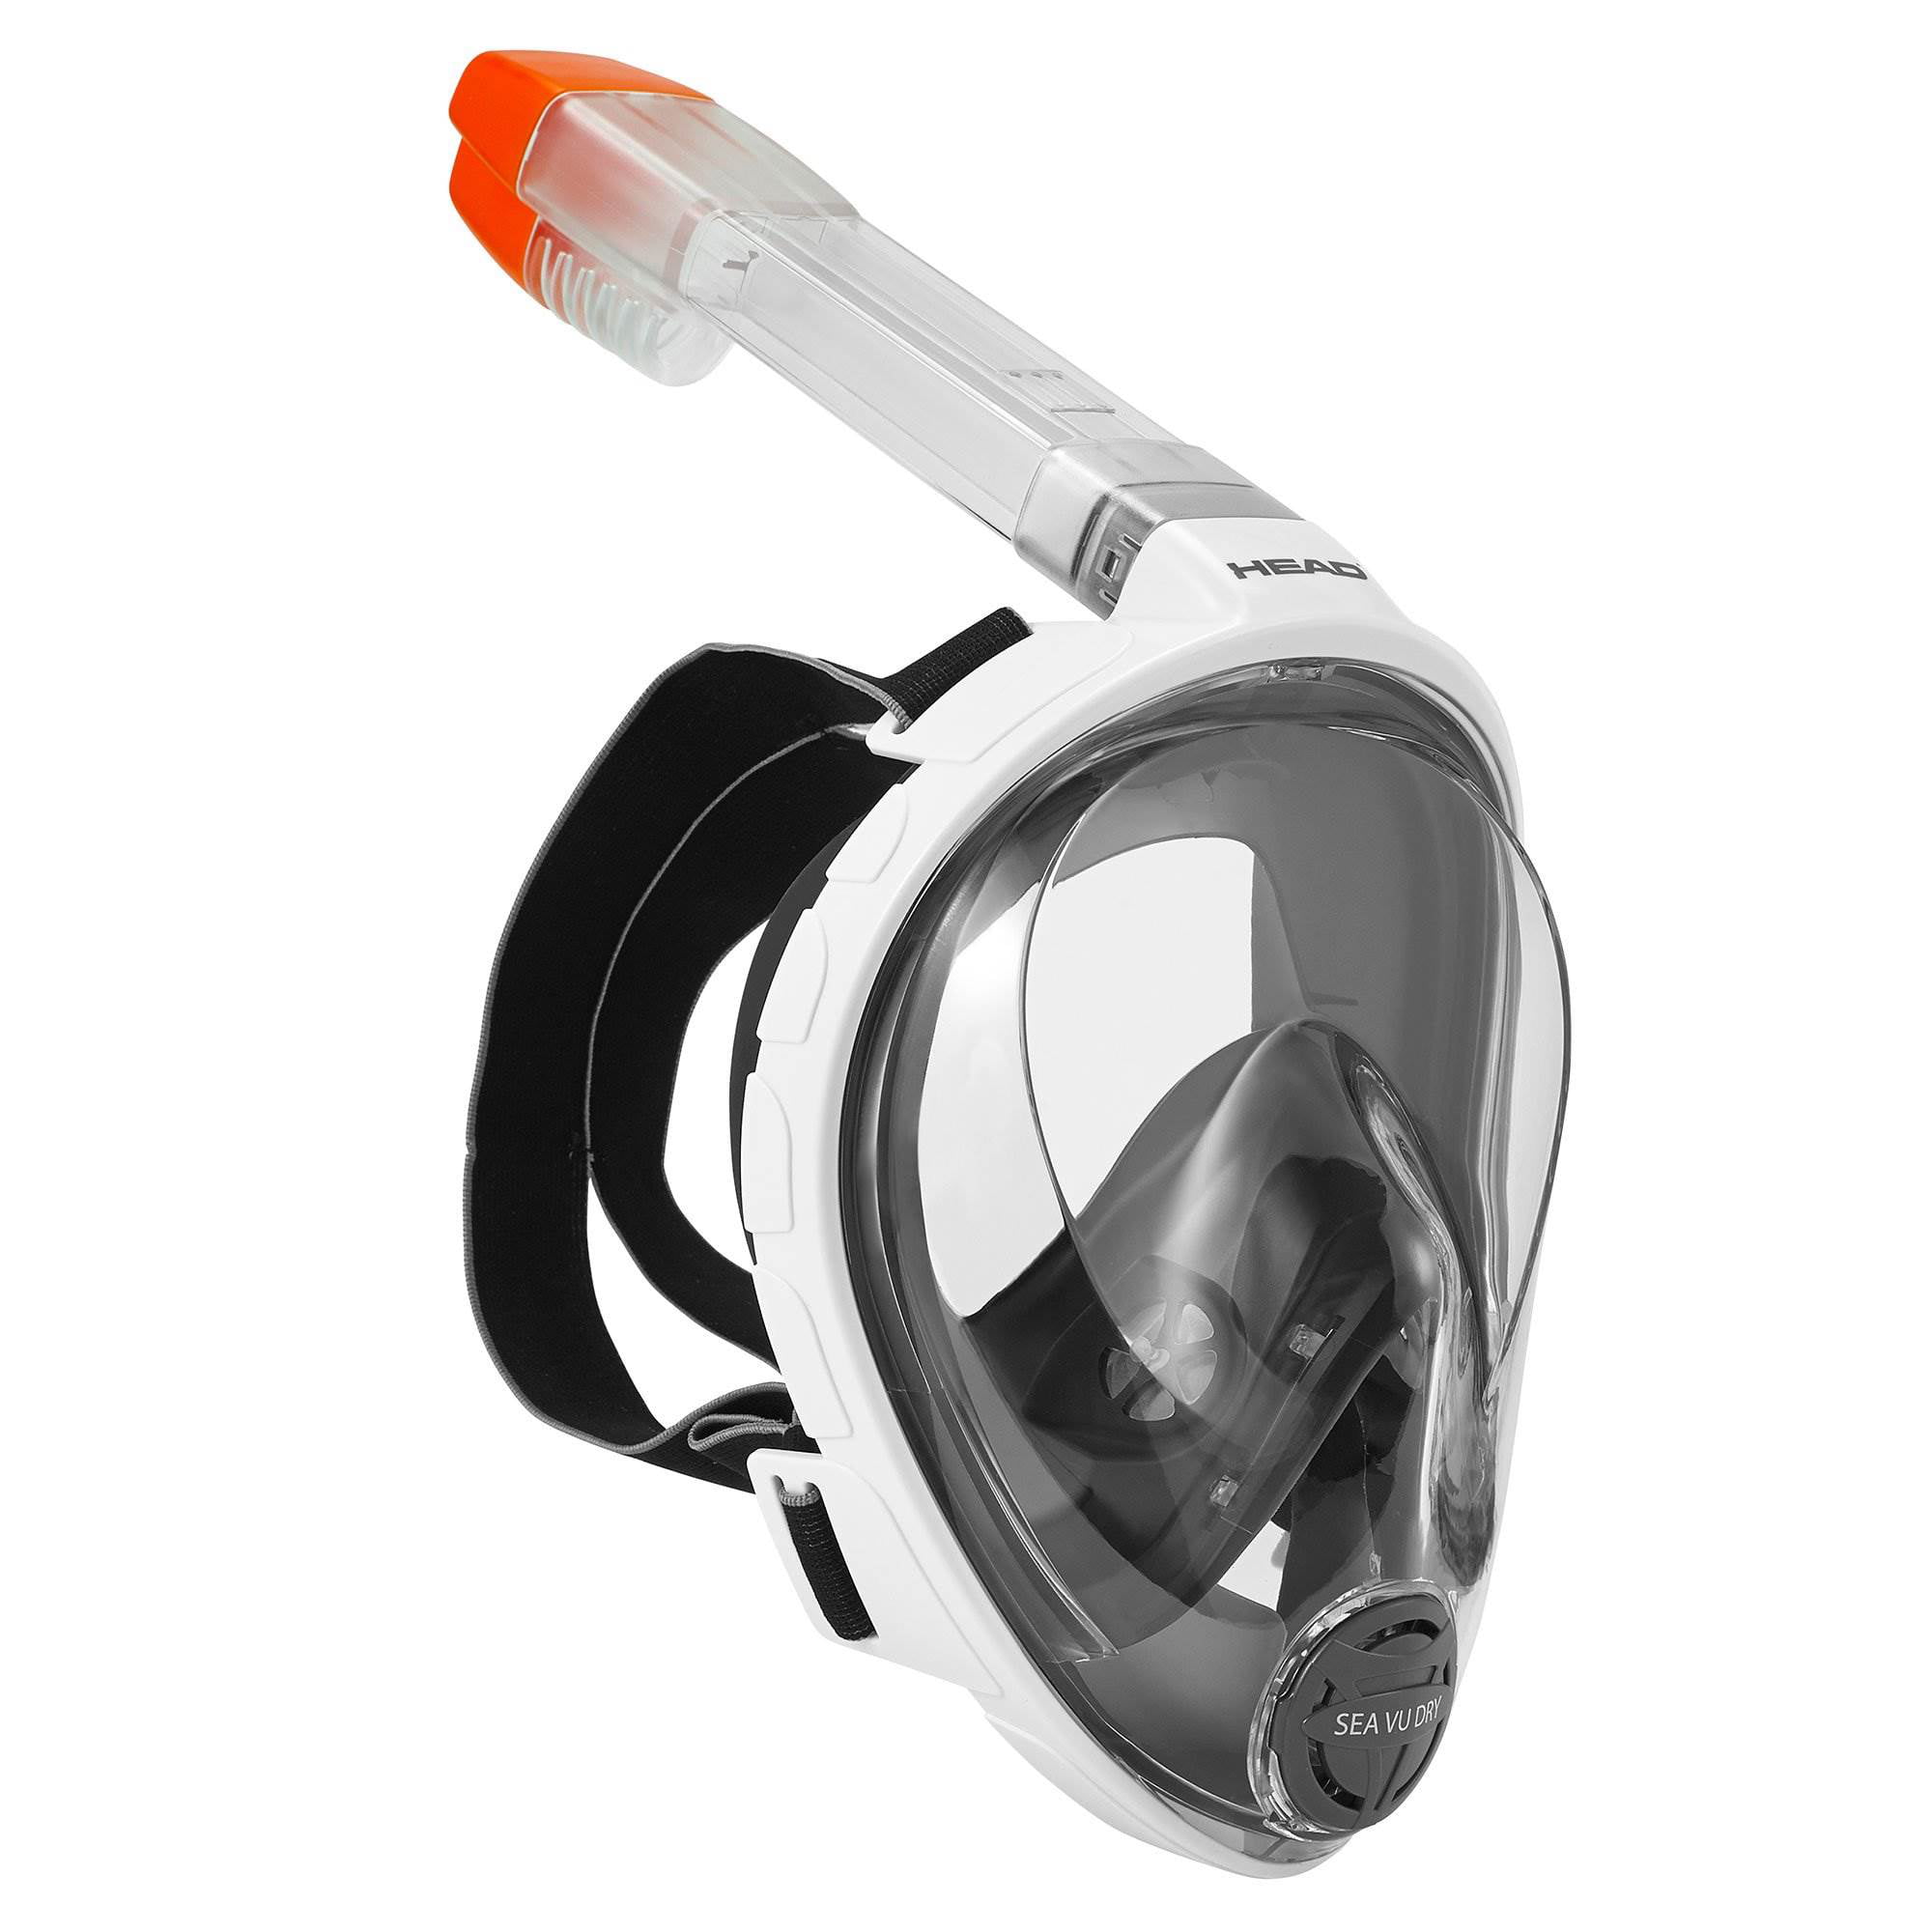 Made in Italy HEAD Sea Vu Dry Full Face Snorkeling Mask 